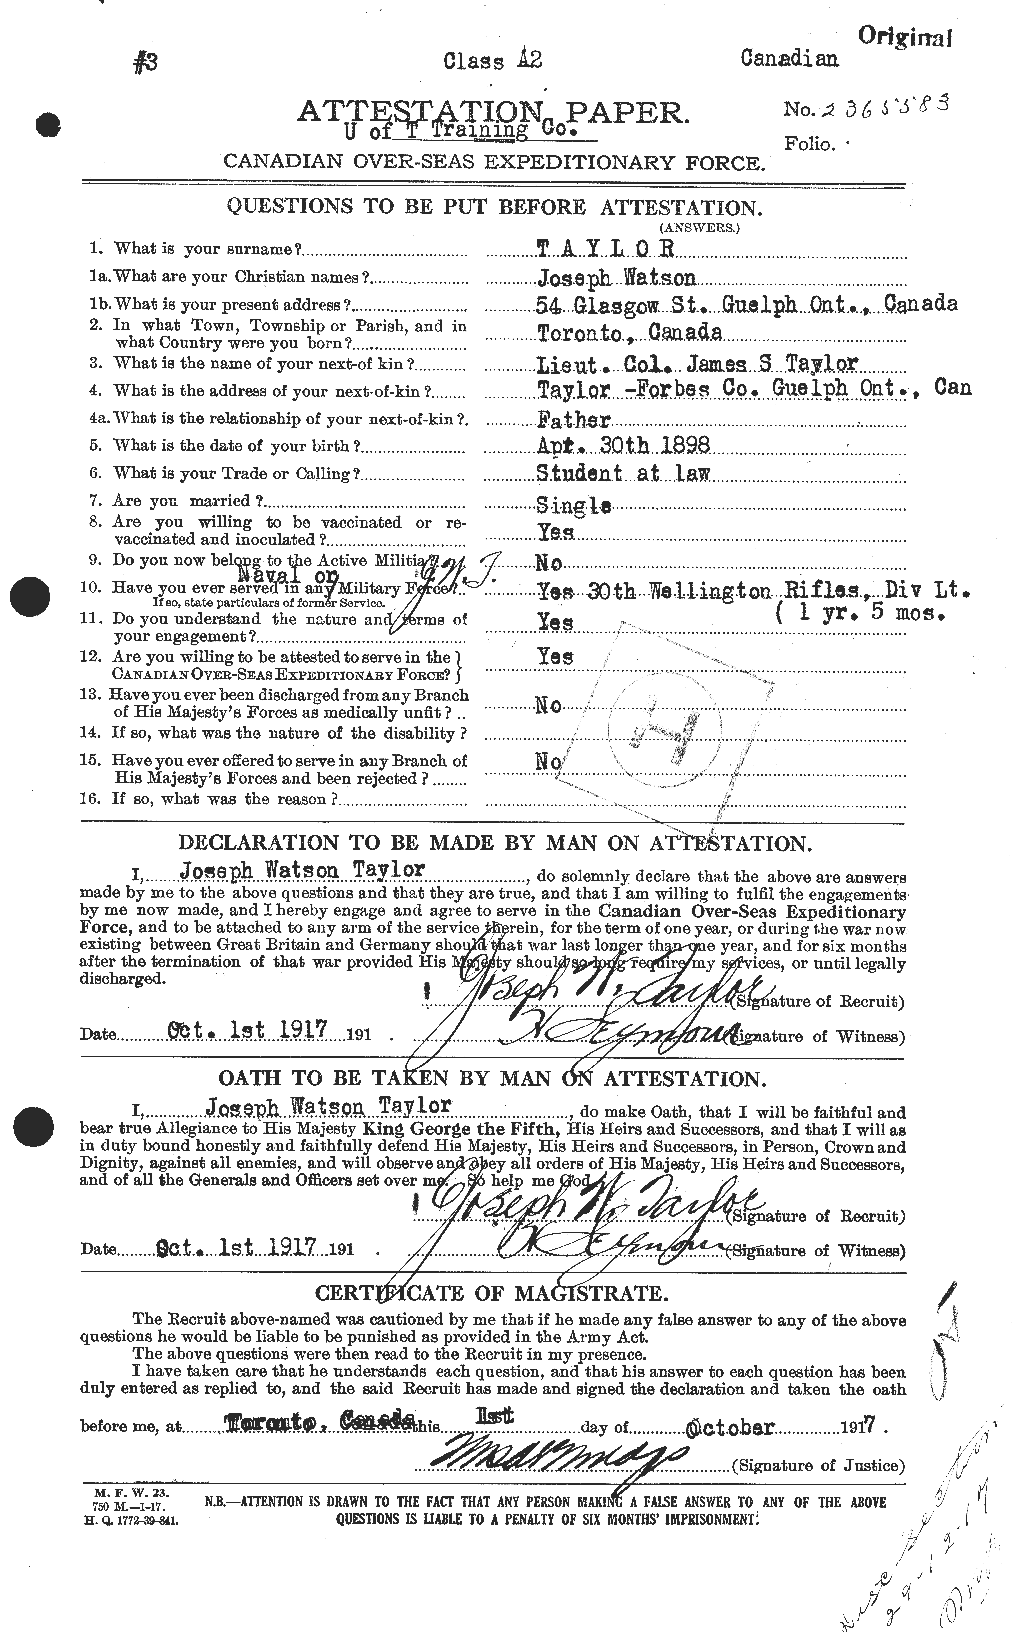 Personnel Records of the First World War - CEF 627588a